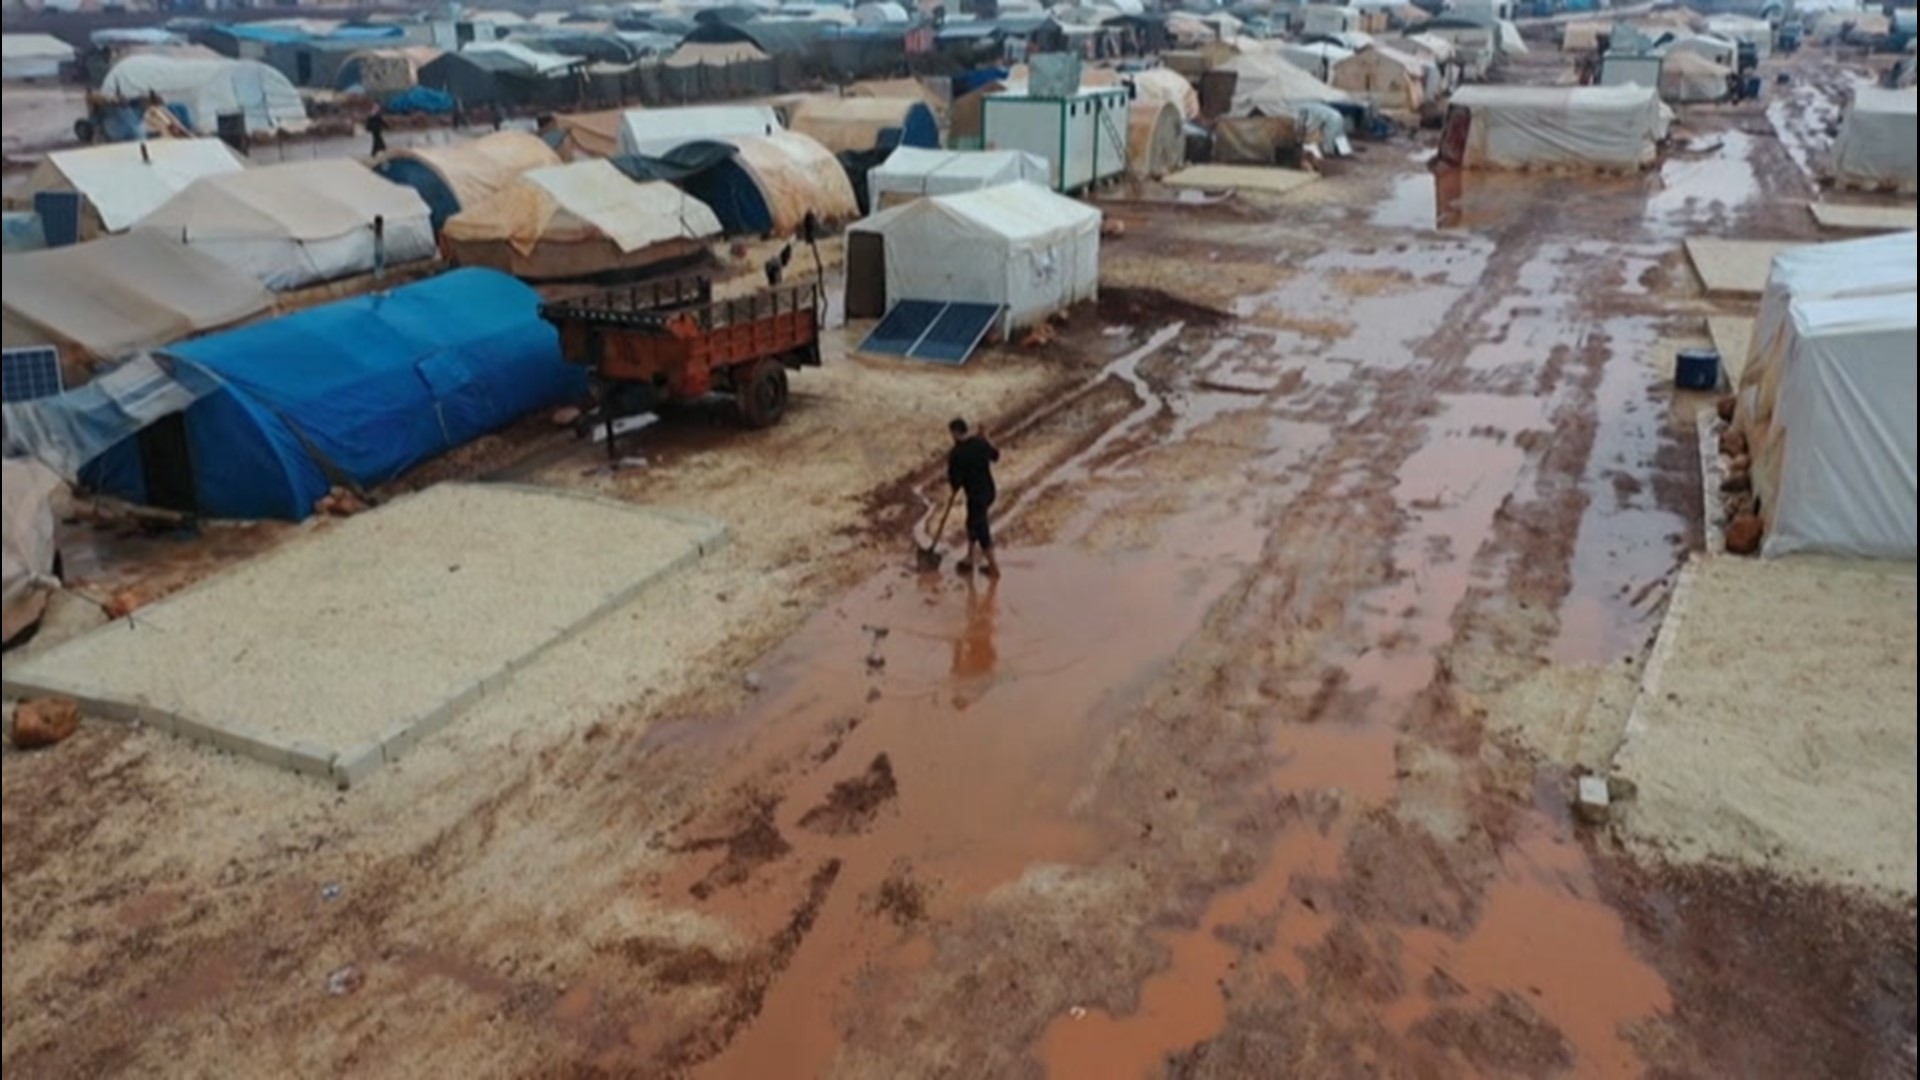 Heavy rain at displacement camps in northwest Syria has led to flooding that destroyed or damaged tents for tens of thousands of people and killed one child.